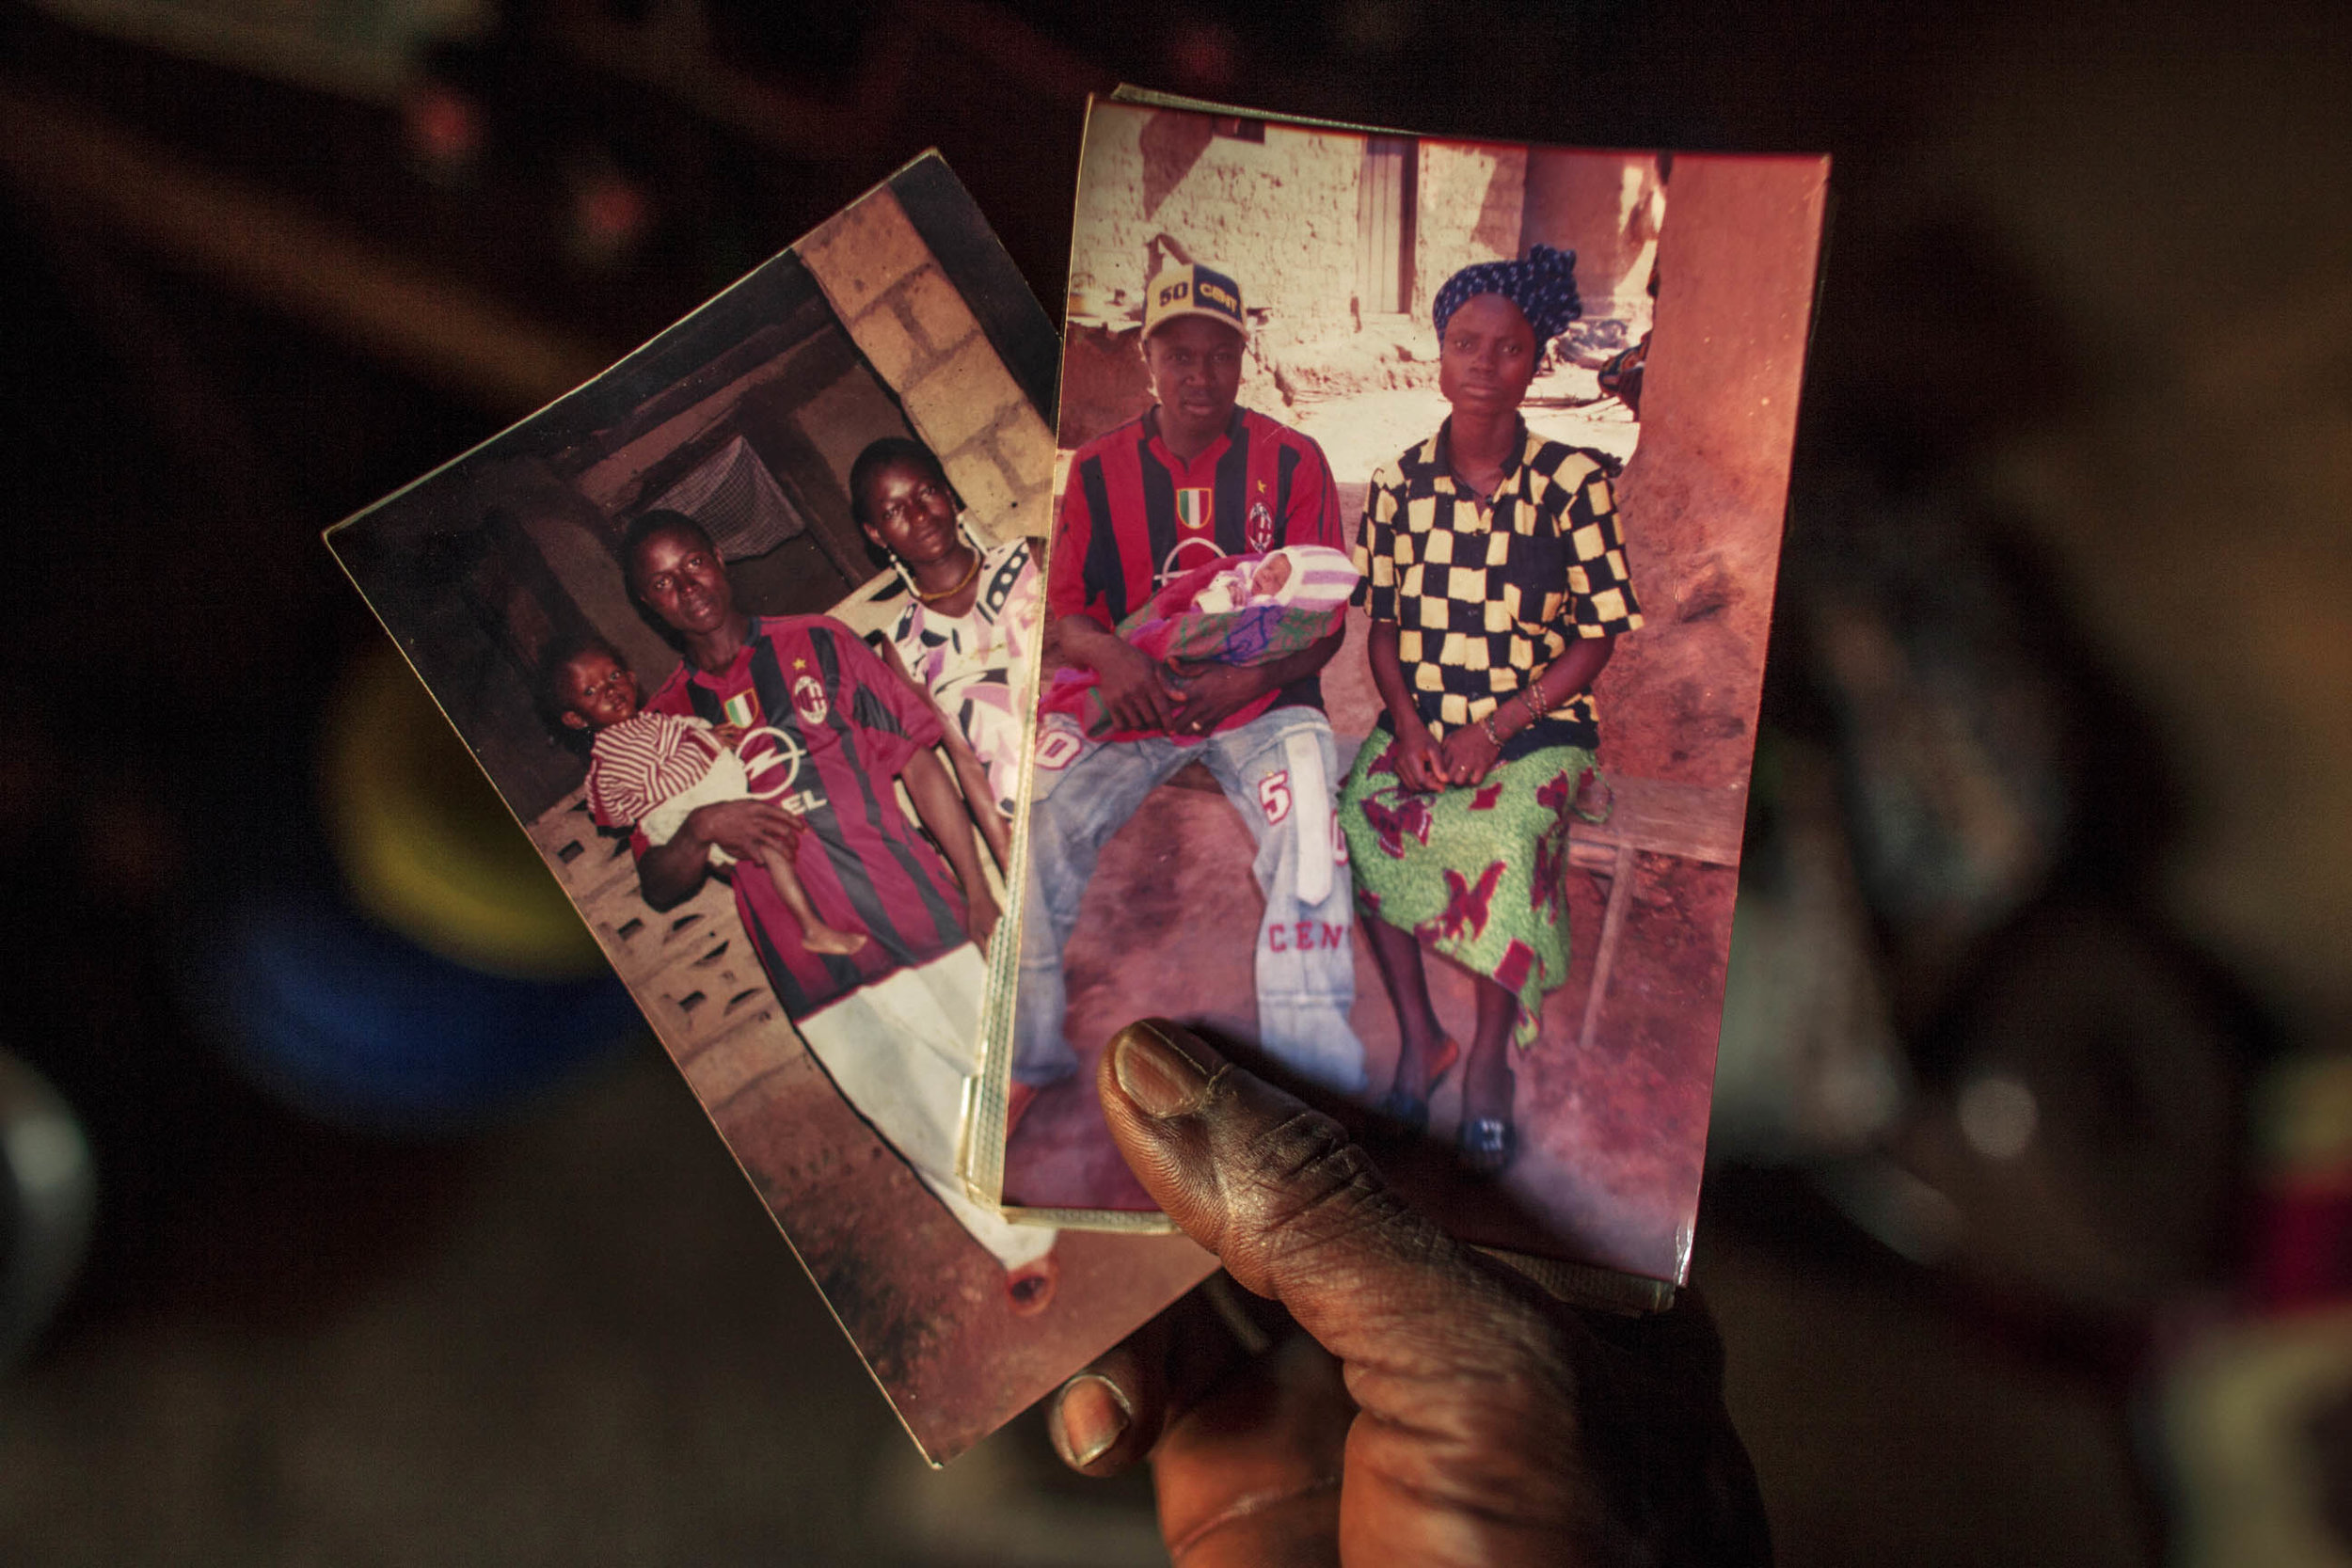  Etienne shows the few photographs he has of his late wife and son. (Photo by Pete Muller/Prime for National Geographic) 